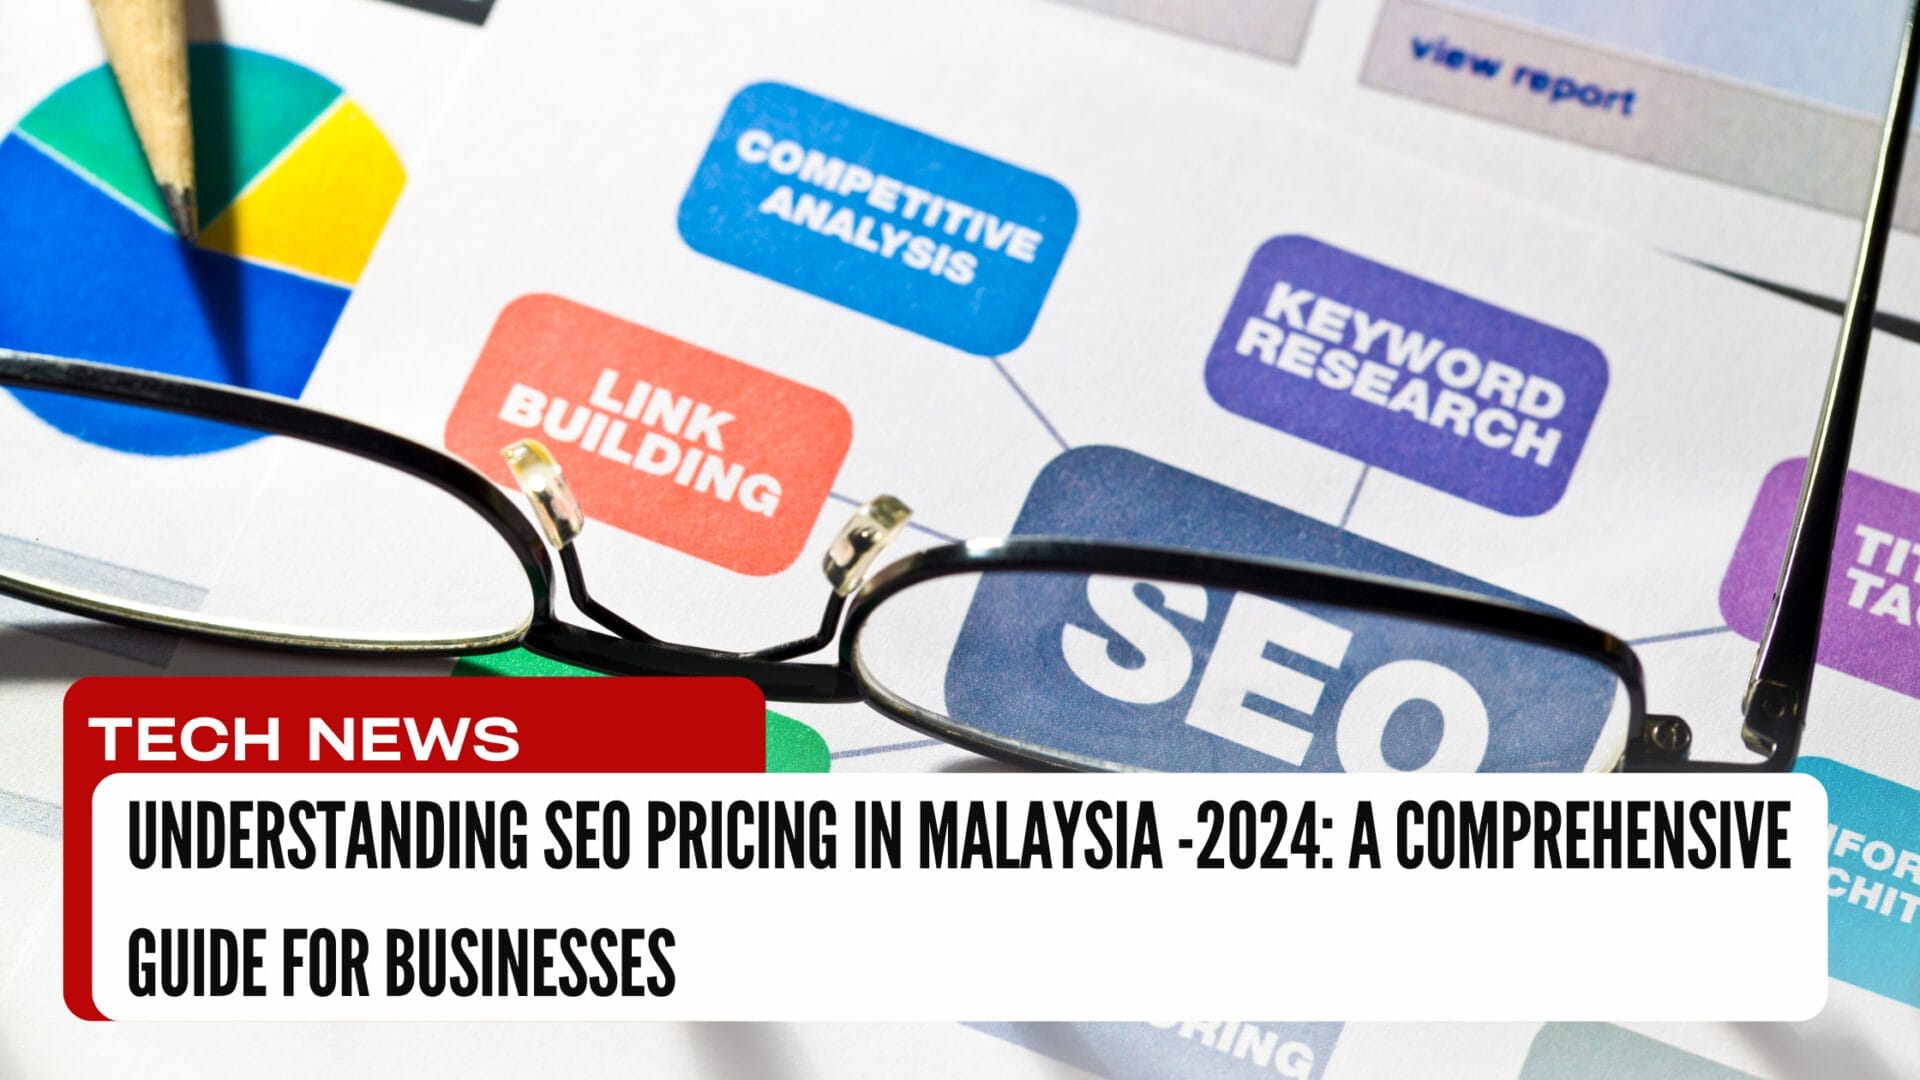 Navigating SEO pricing in Malaysia can seem like charting unknown waters. Our comprehensive guide breaks down pricing models, cost-influencing factors, and expectations to make your investment in SEO both enlightening and valuable, whether you're a beginner or well-versed in digital marketing.